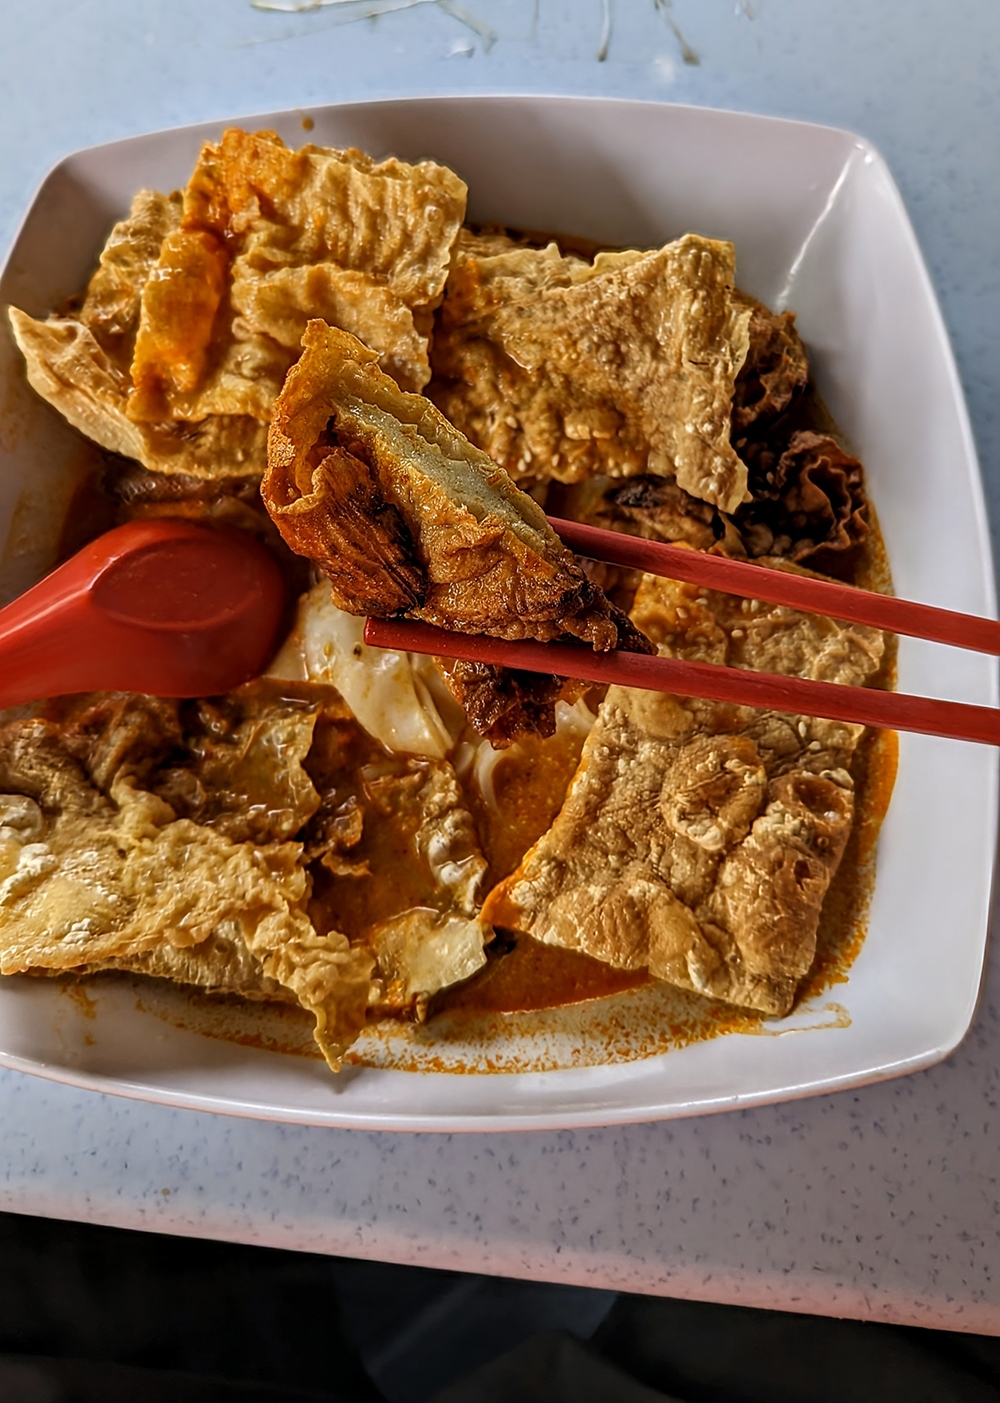 Fried ‘fu chuk’ skin and ‘sui kow’ in curry go together like cookies and milk.